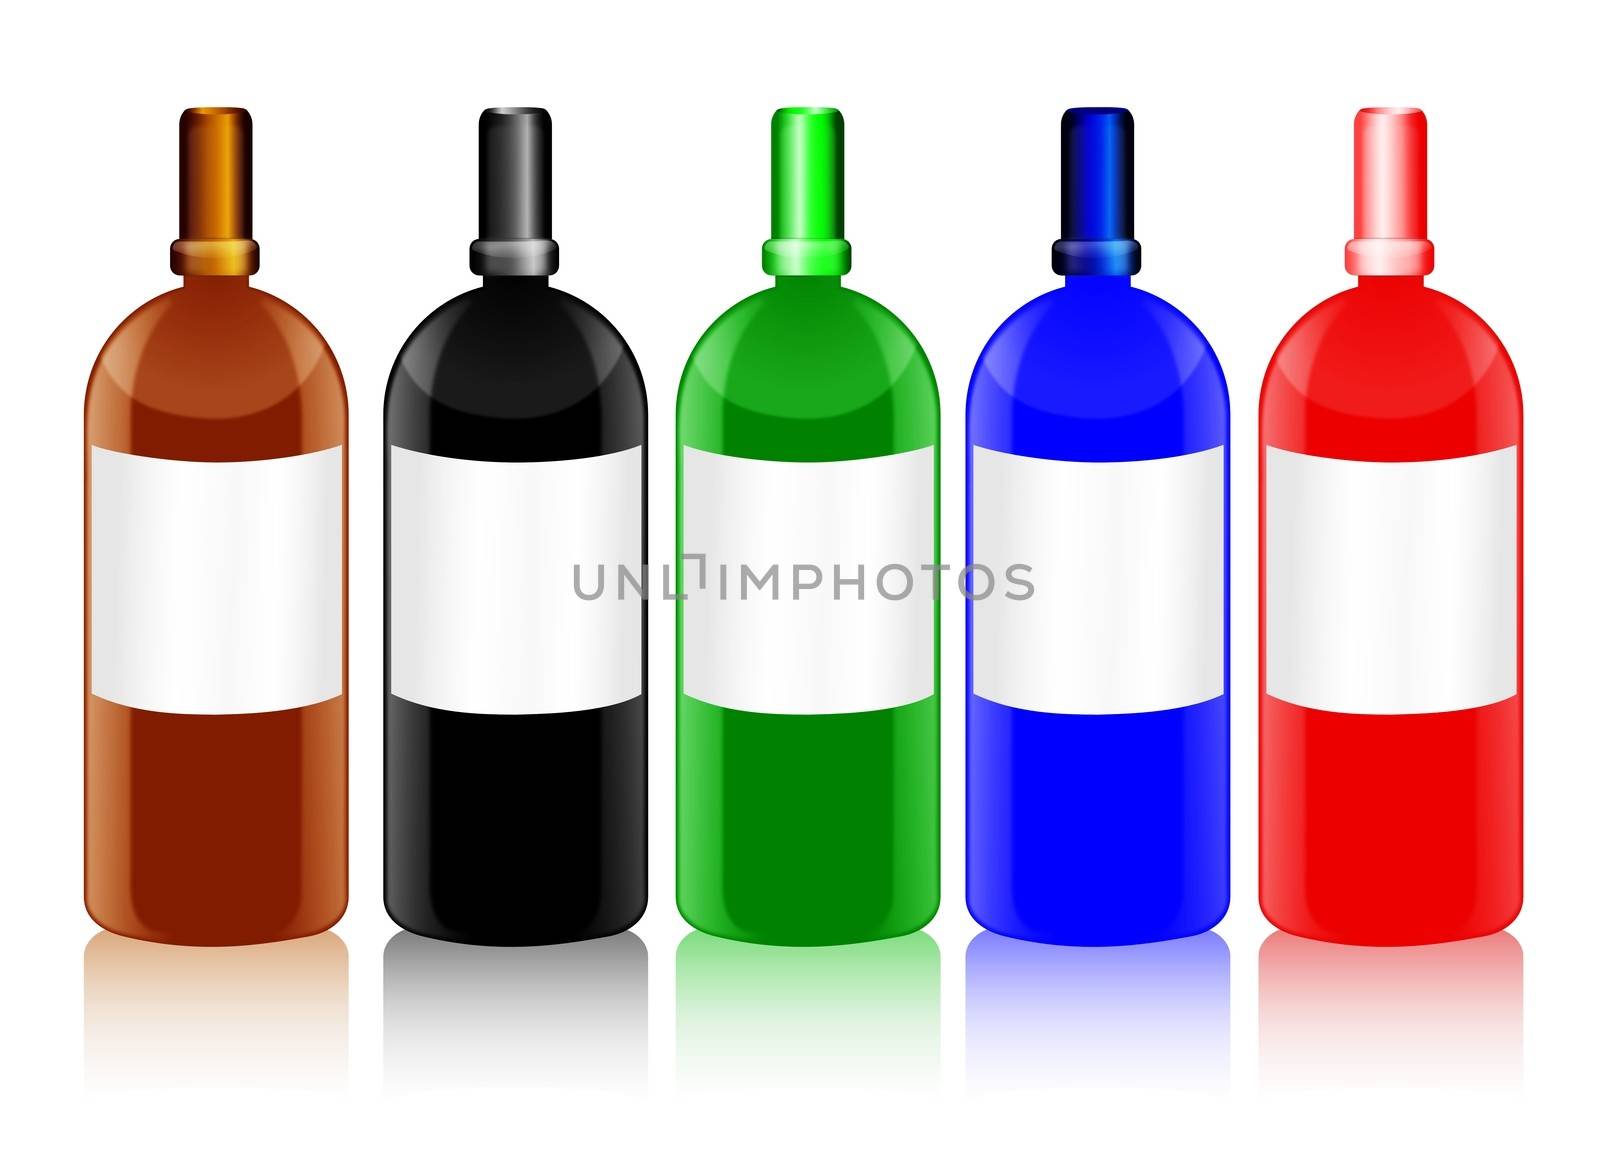 Glass Bottles with Blank Labels in Different Colors by RichieThakur